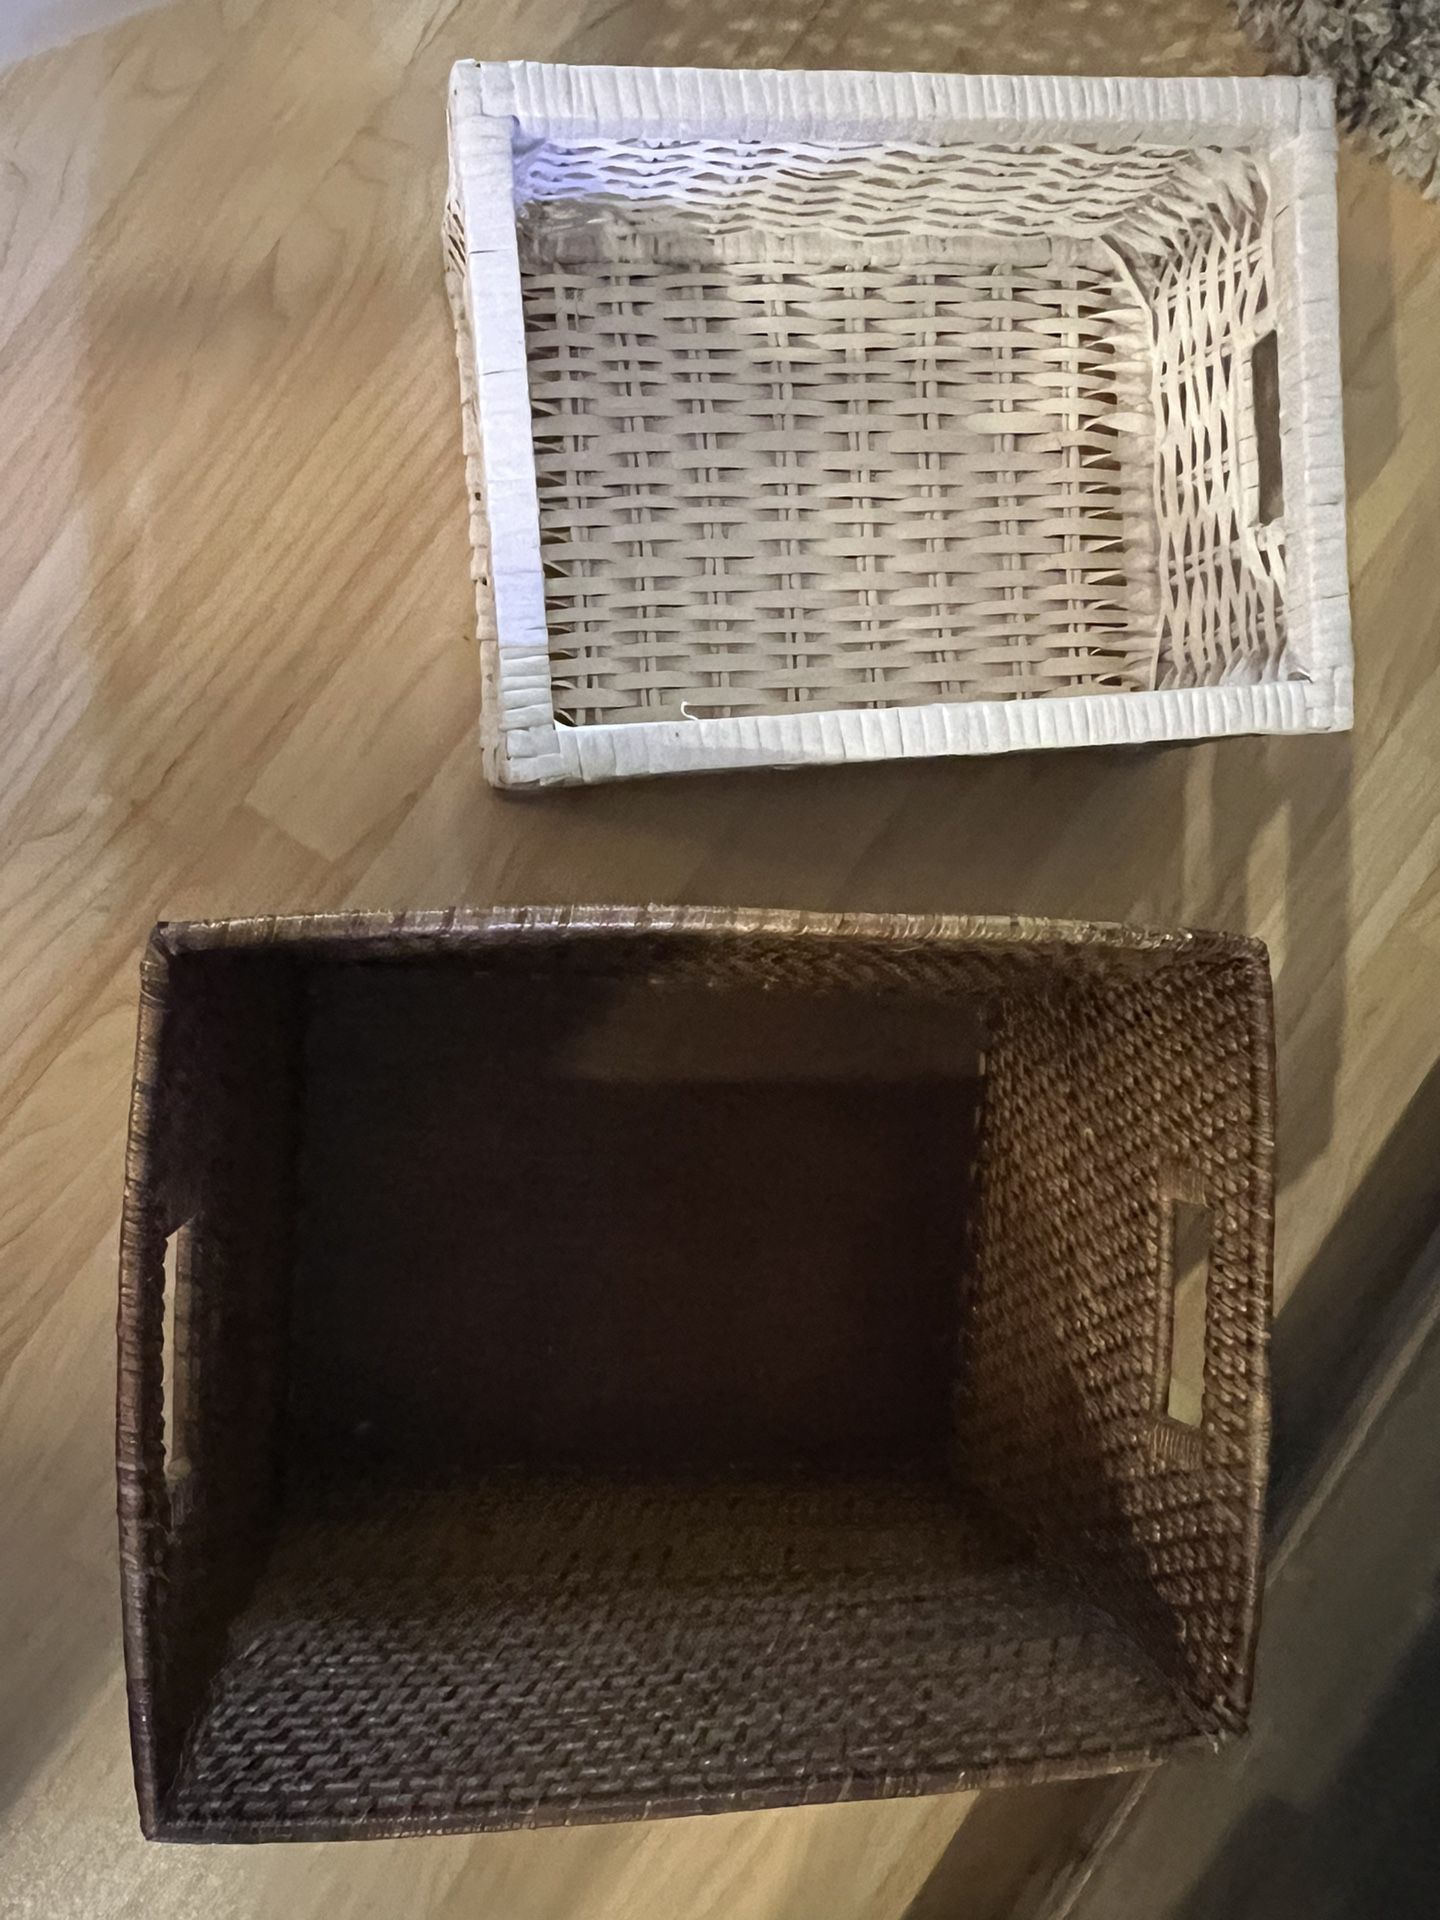 Woven Storage Baskets Containers For Organizing